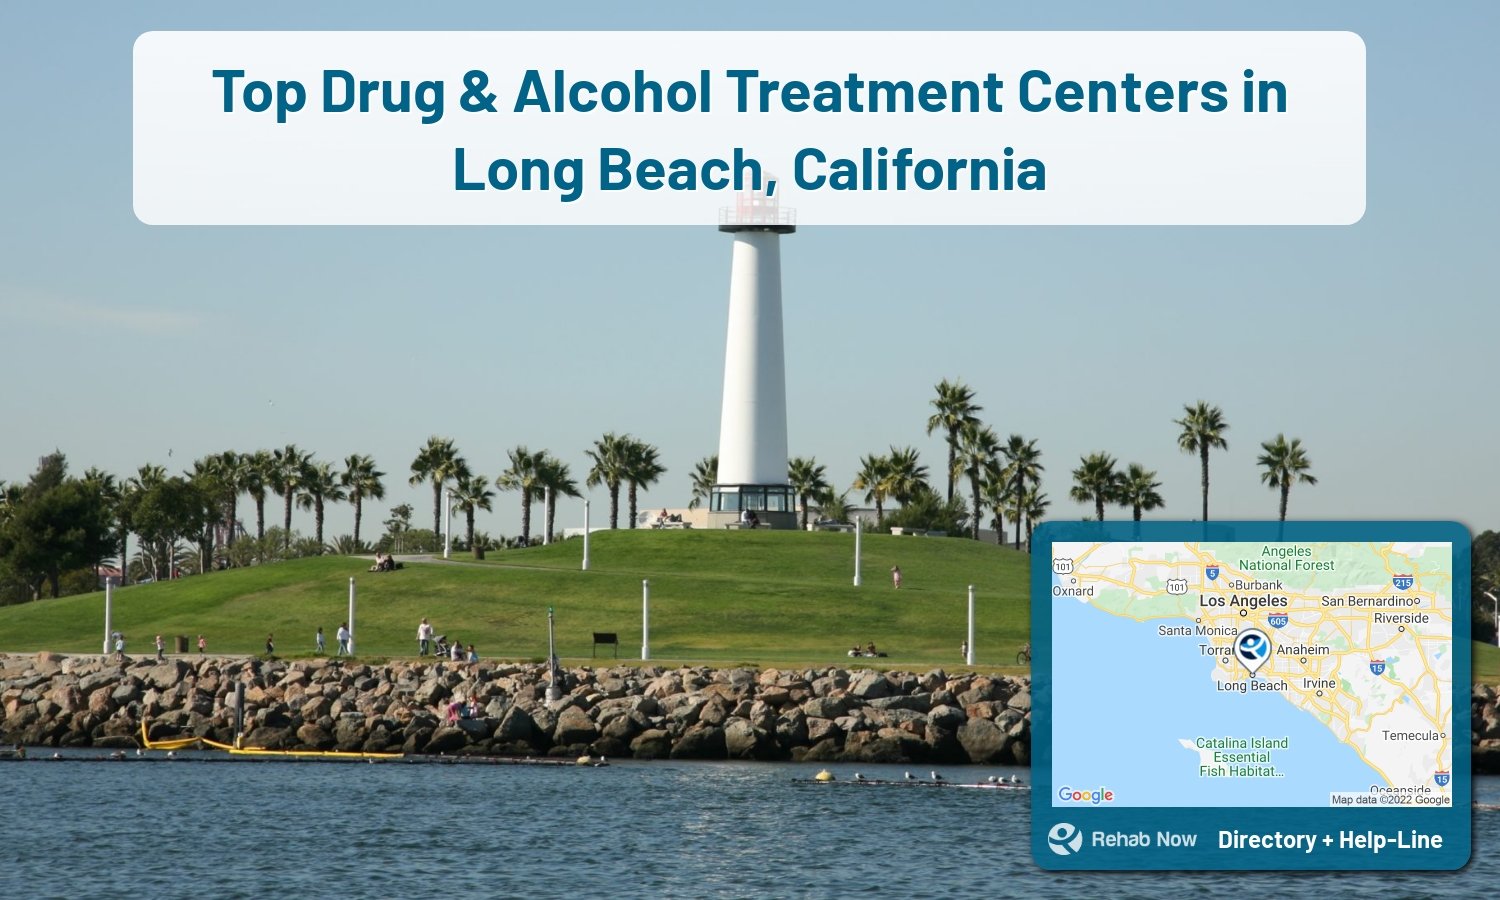 Ready to pick a rehab center in Long Beach? Get off alcohol, opiates, and other drugs, by selecting top drug rehab centers in California